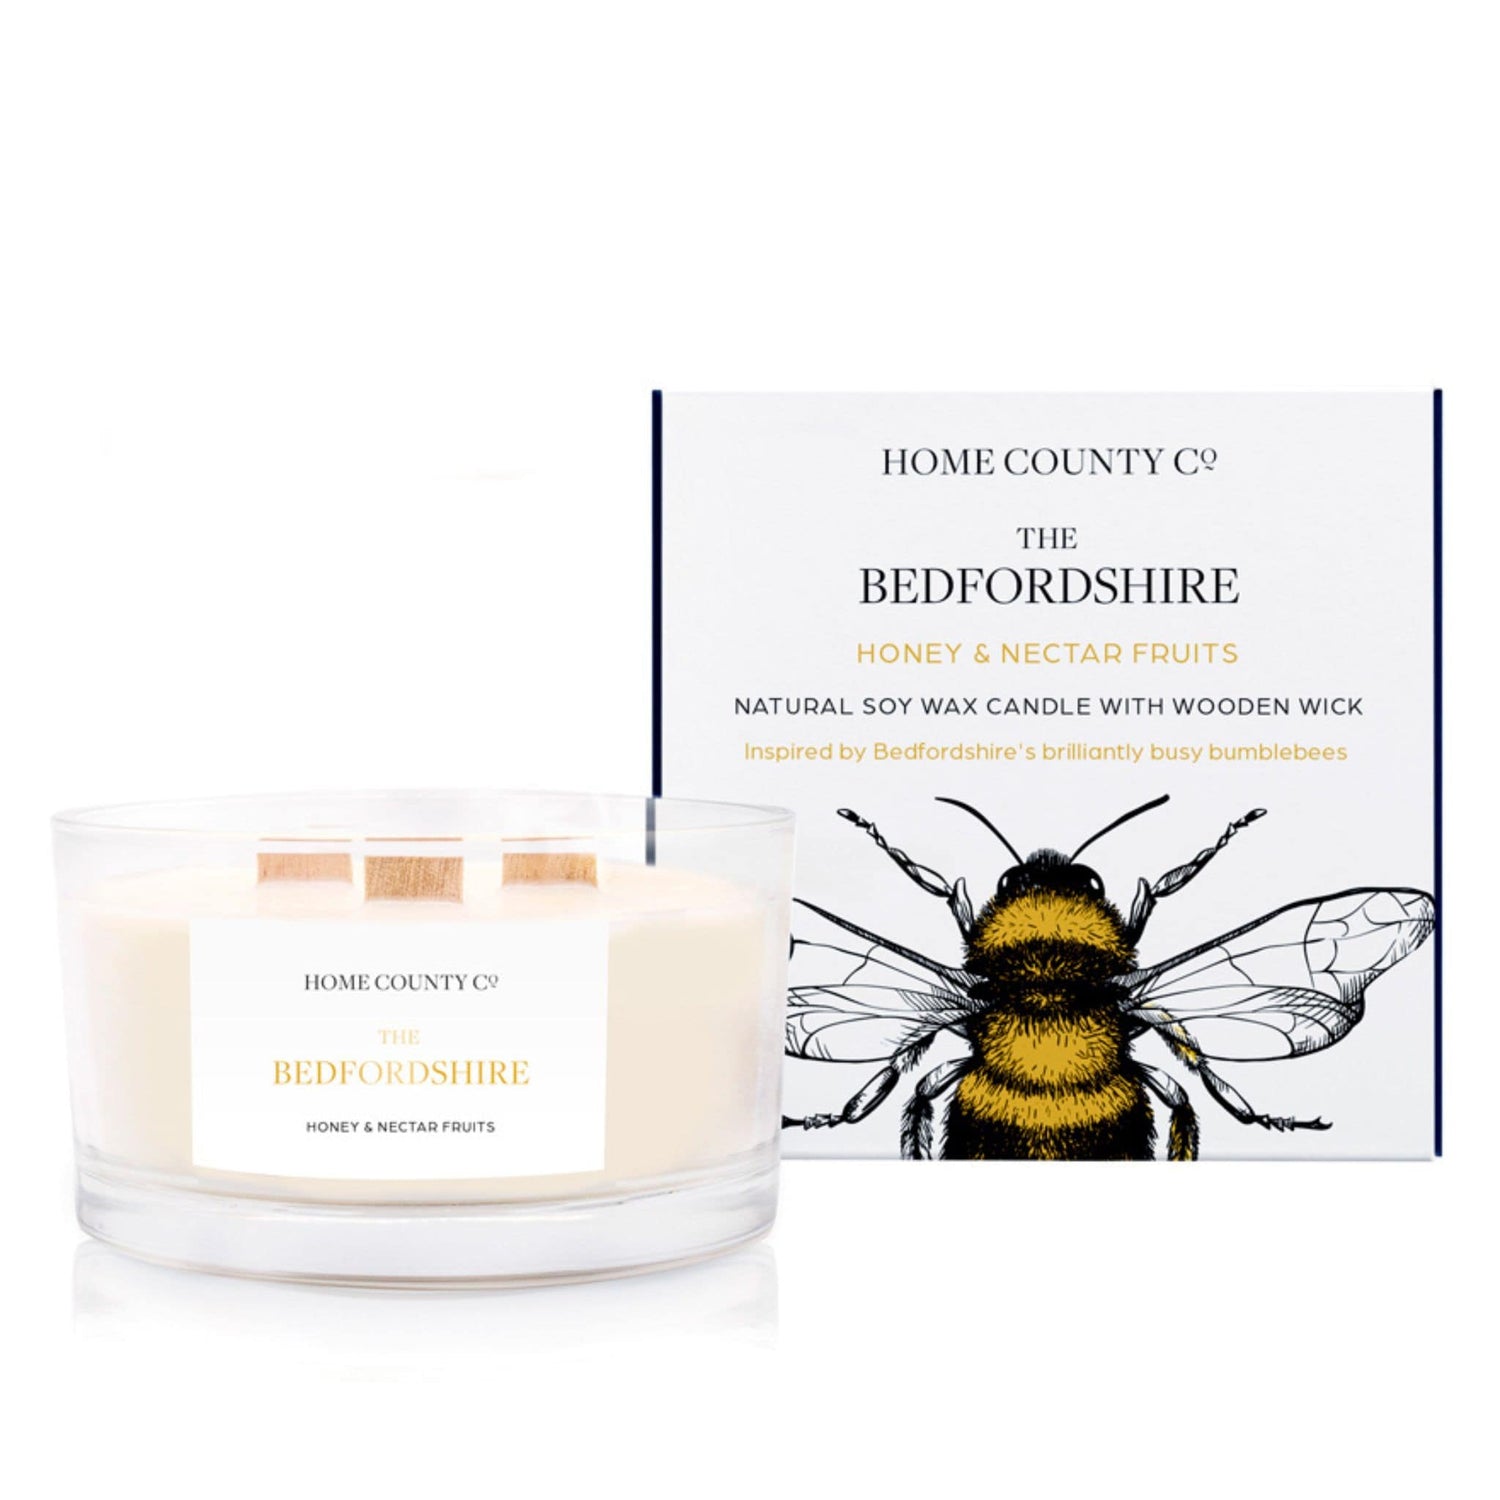 A honey and nectar fruits scented 3 wick candle from the Home County Co. is shown next to its eco-friendly candle packaging box. 